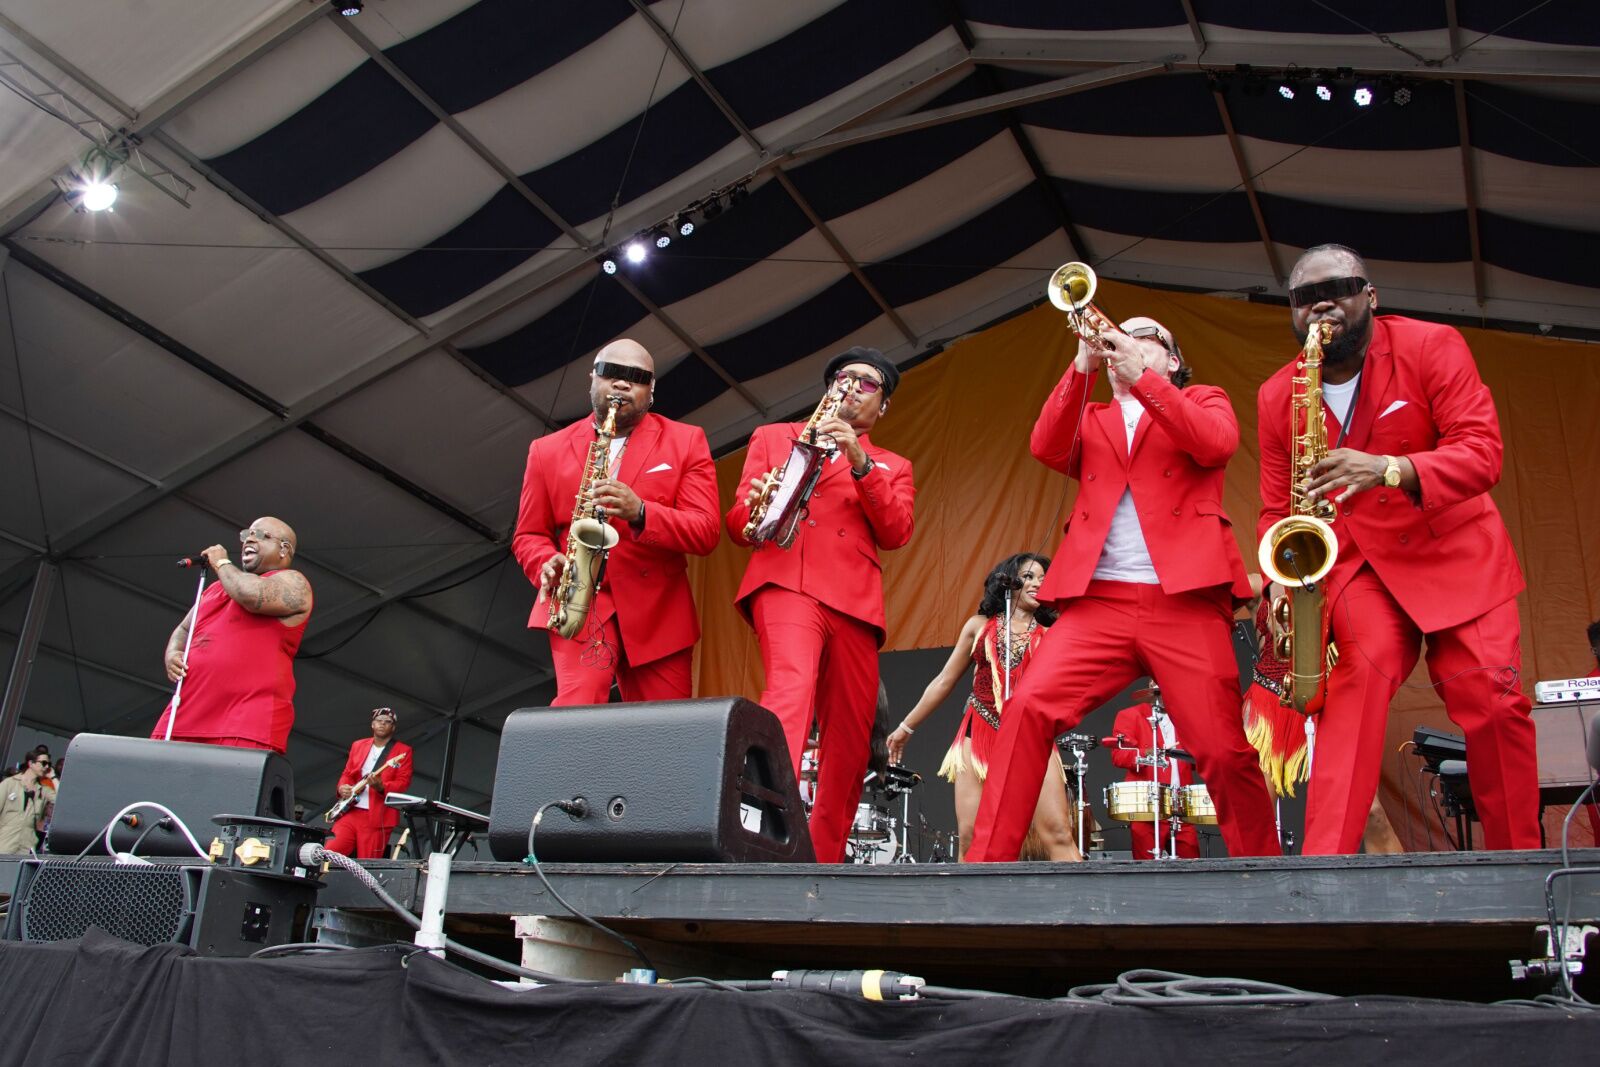 New orleans festivals - band at jazz fest wearing red